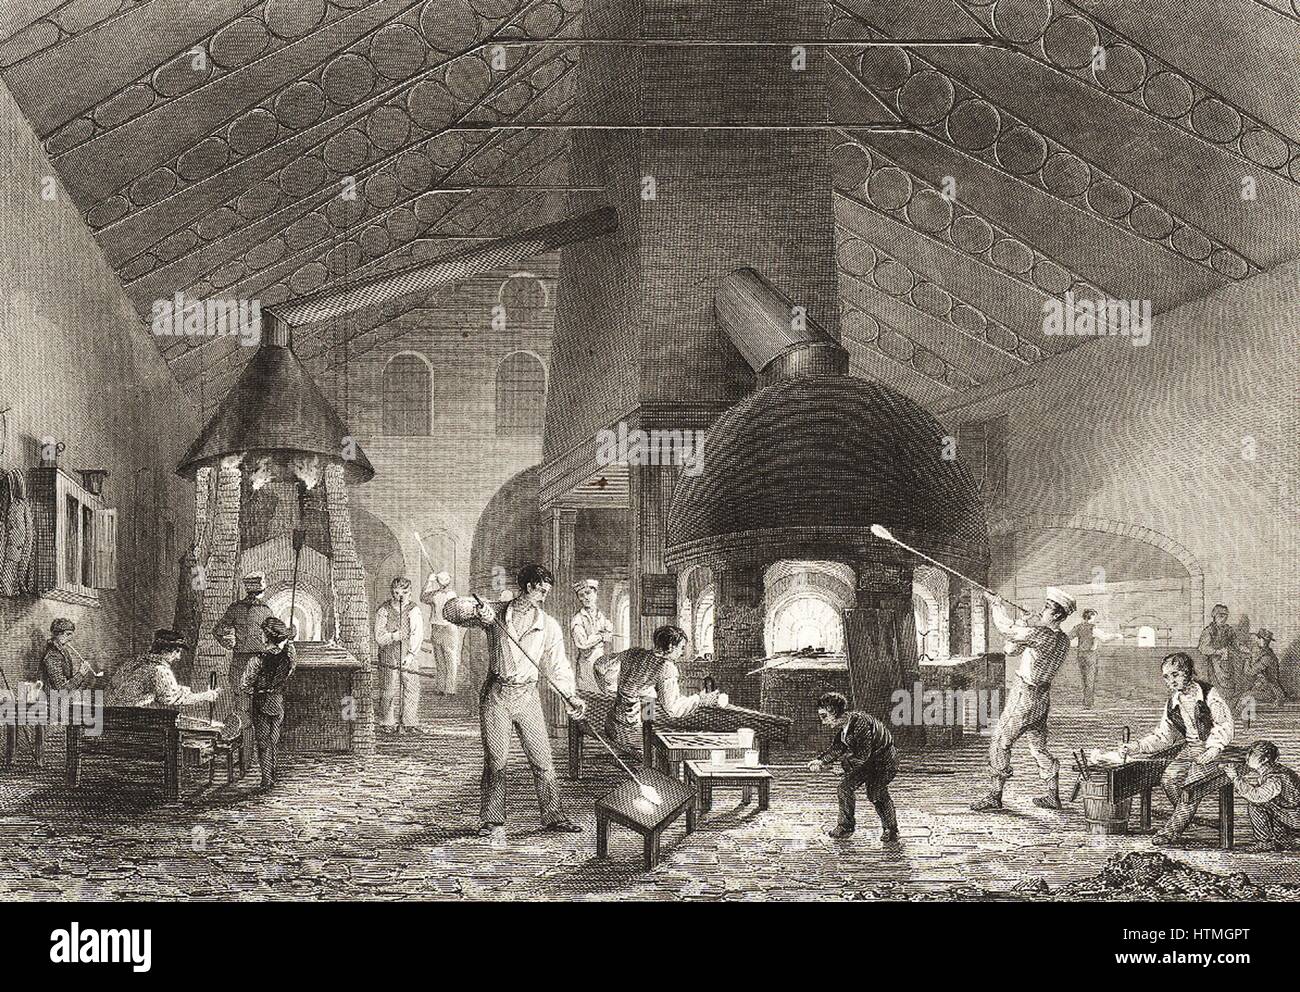 Men and boys at Aspley Pellatt's Falcon Glass Works, Holland Street, Blackfriars, London, 1842. Note cast iron roof trusses. Between 1824-1827) Michael Faraday began investigations of optical glass here before a furnace was built in the Royal Institution. Stock Photo